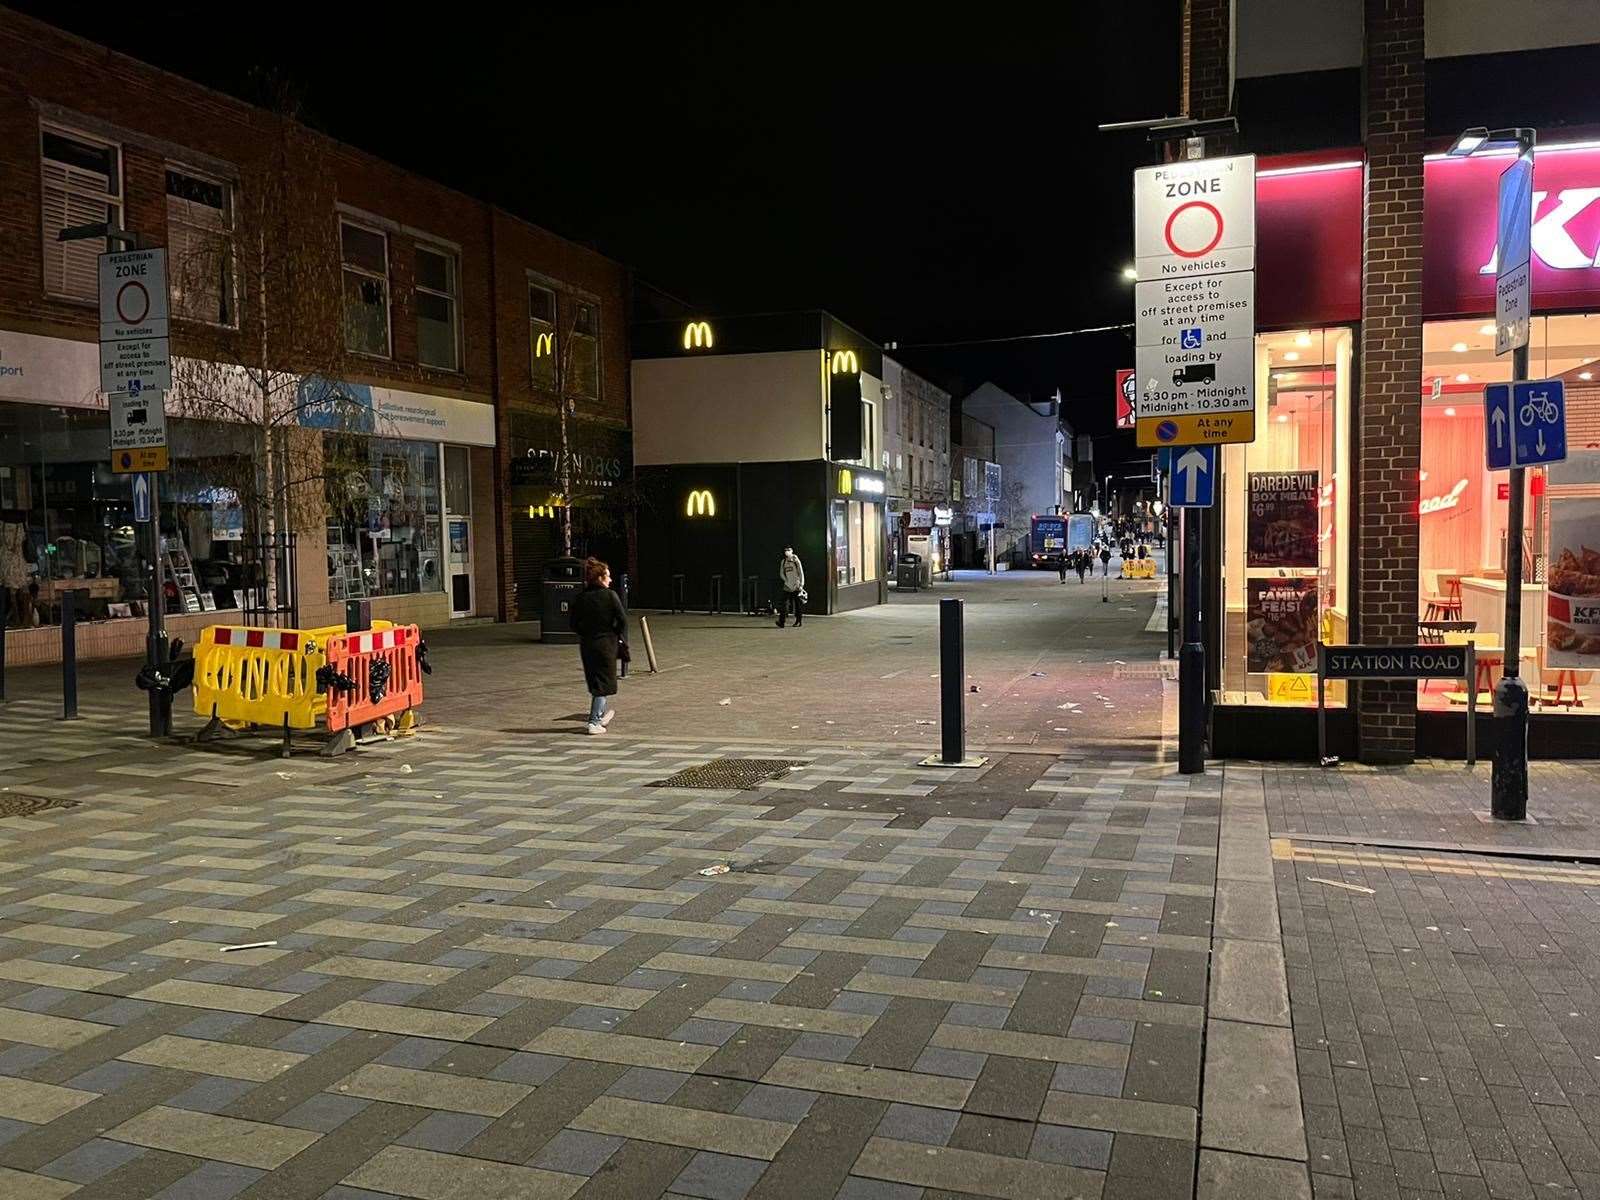 Police arrested a man after an incident near McDonald's and KFC in Maidstone town centre